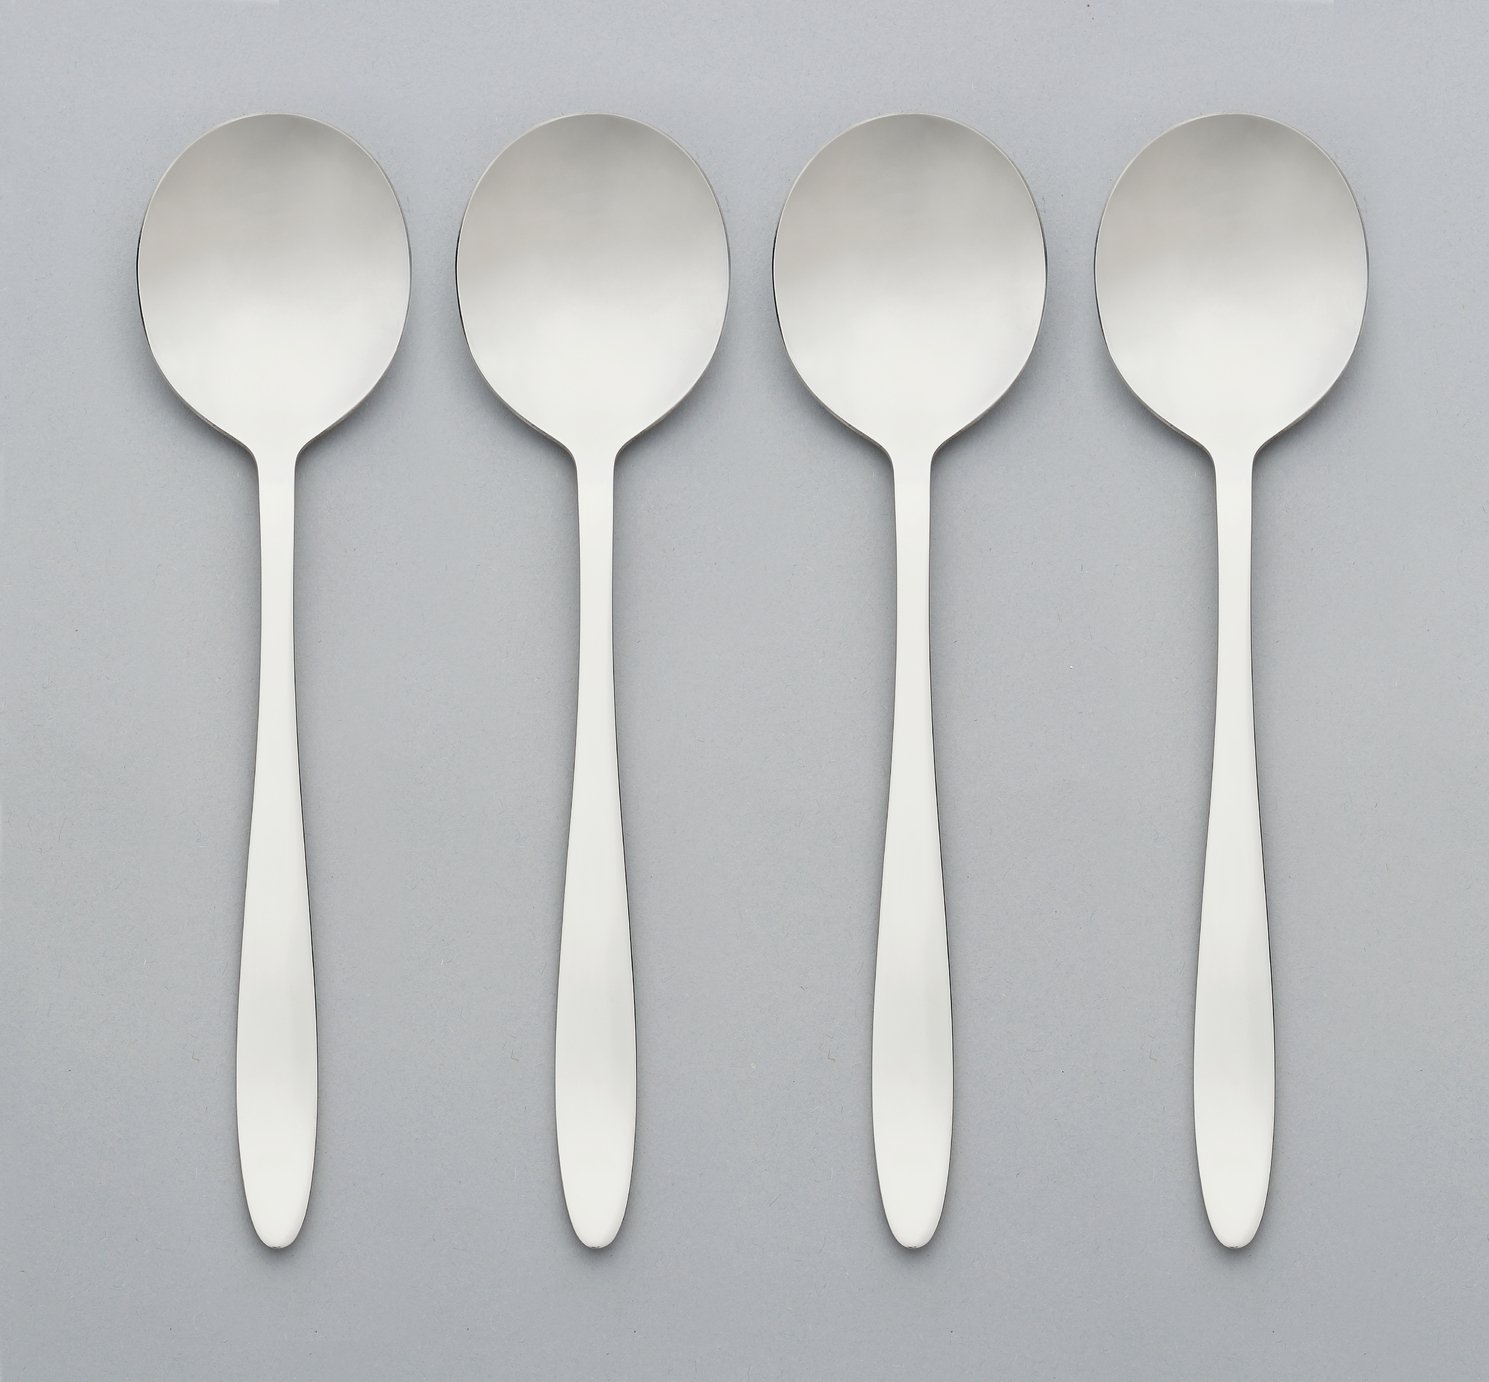 Sainsbury's Home Simplicity Soup Spoons - 4 Pack